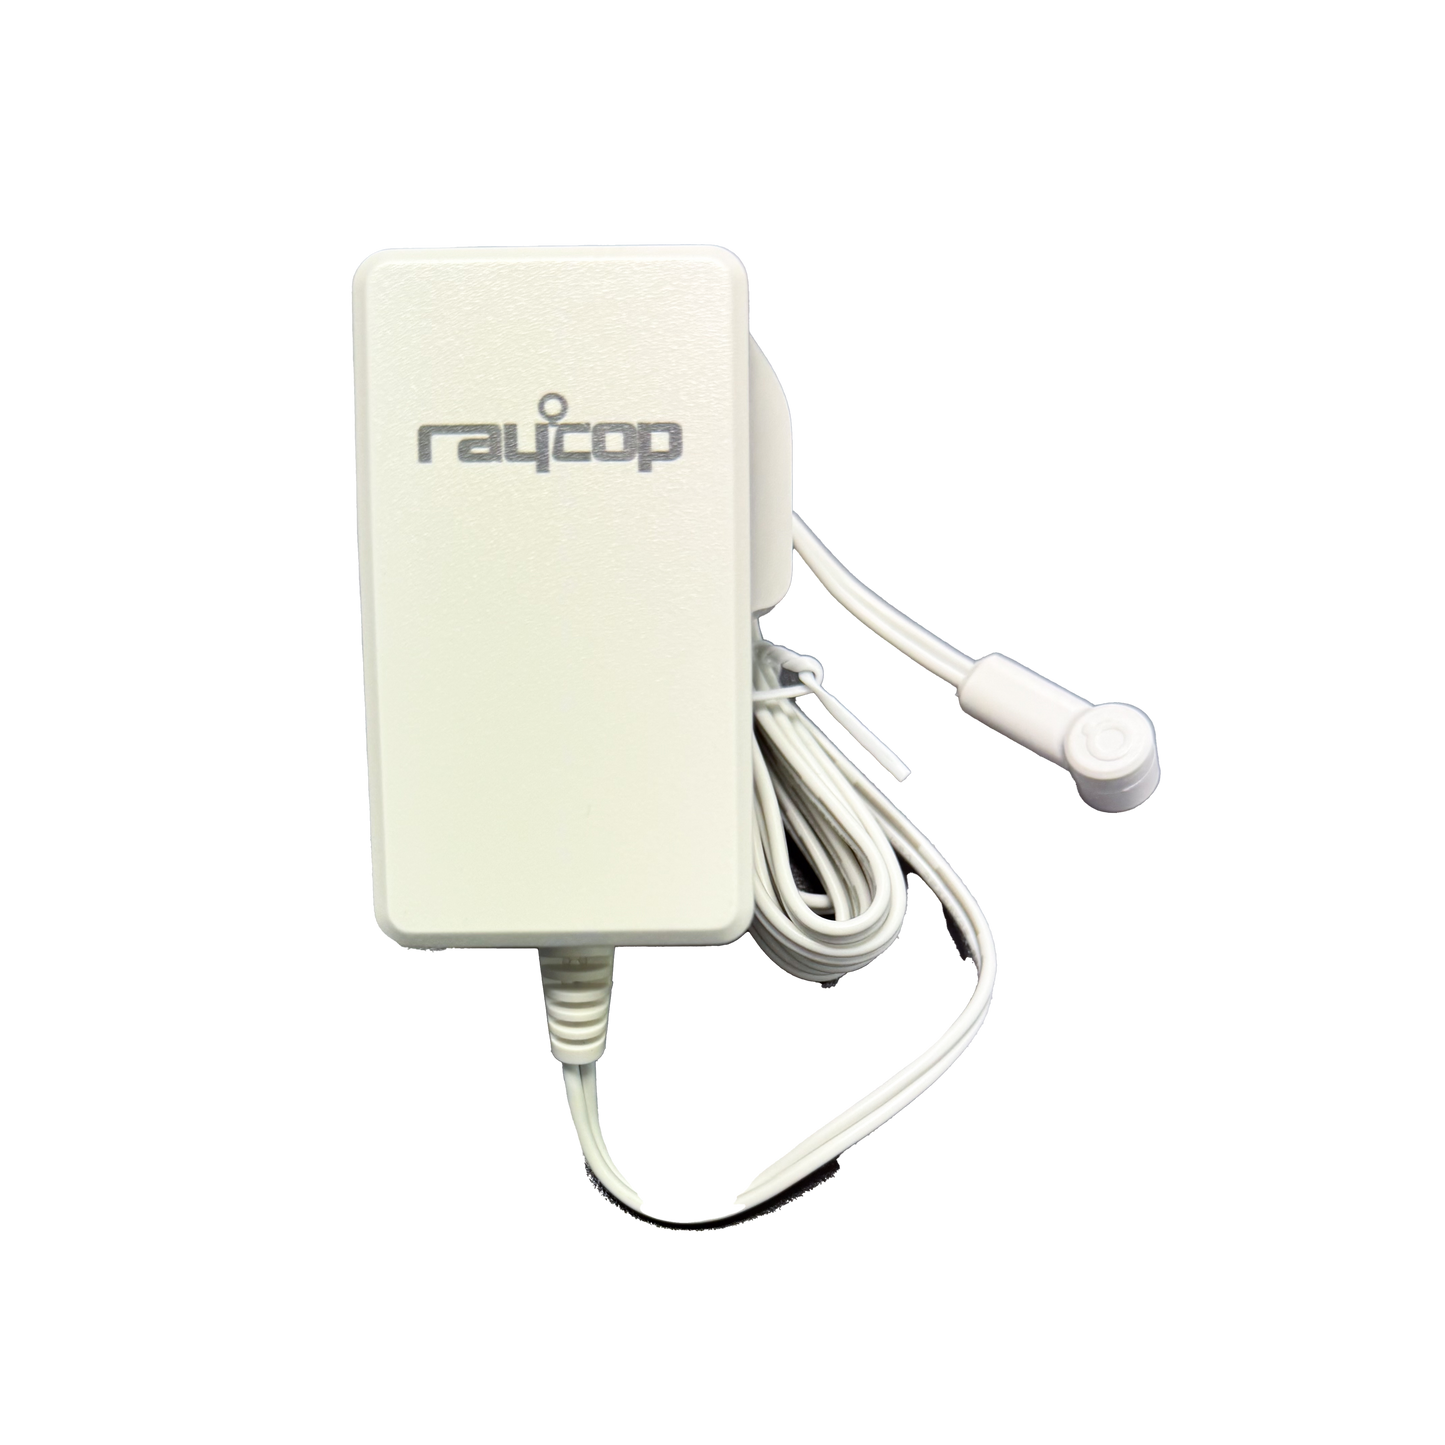 RGO-300 charger